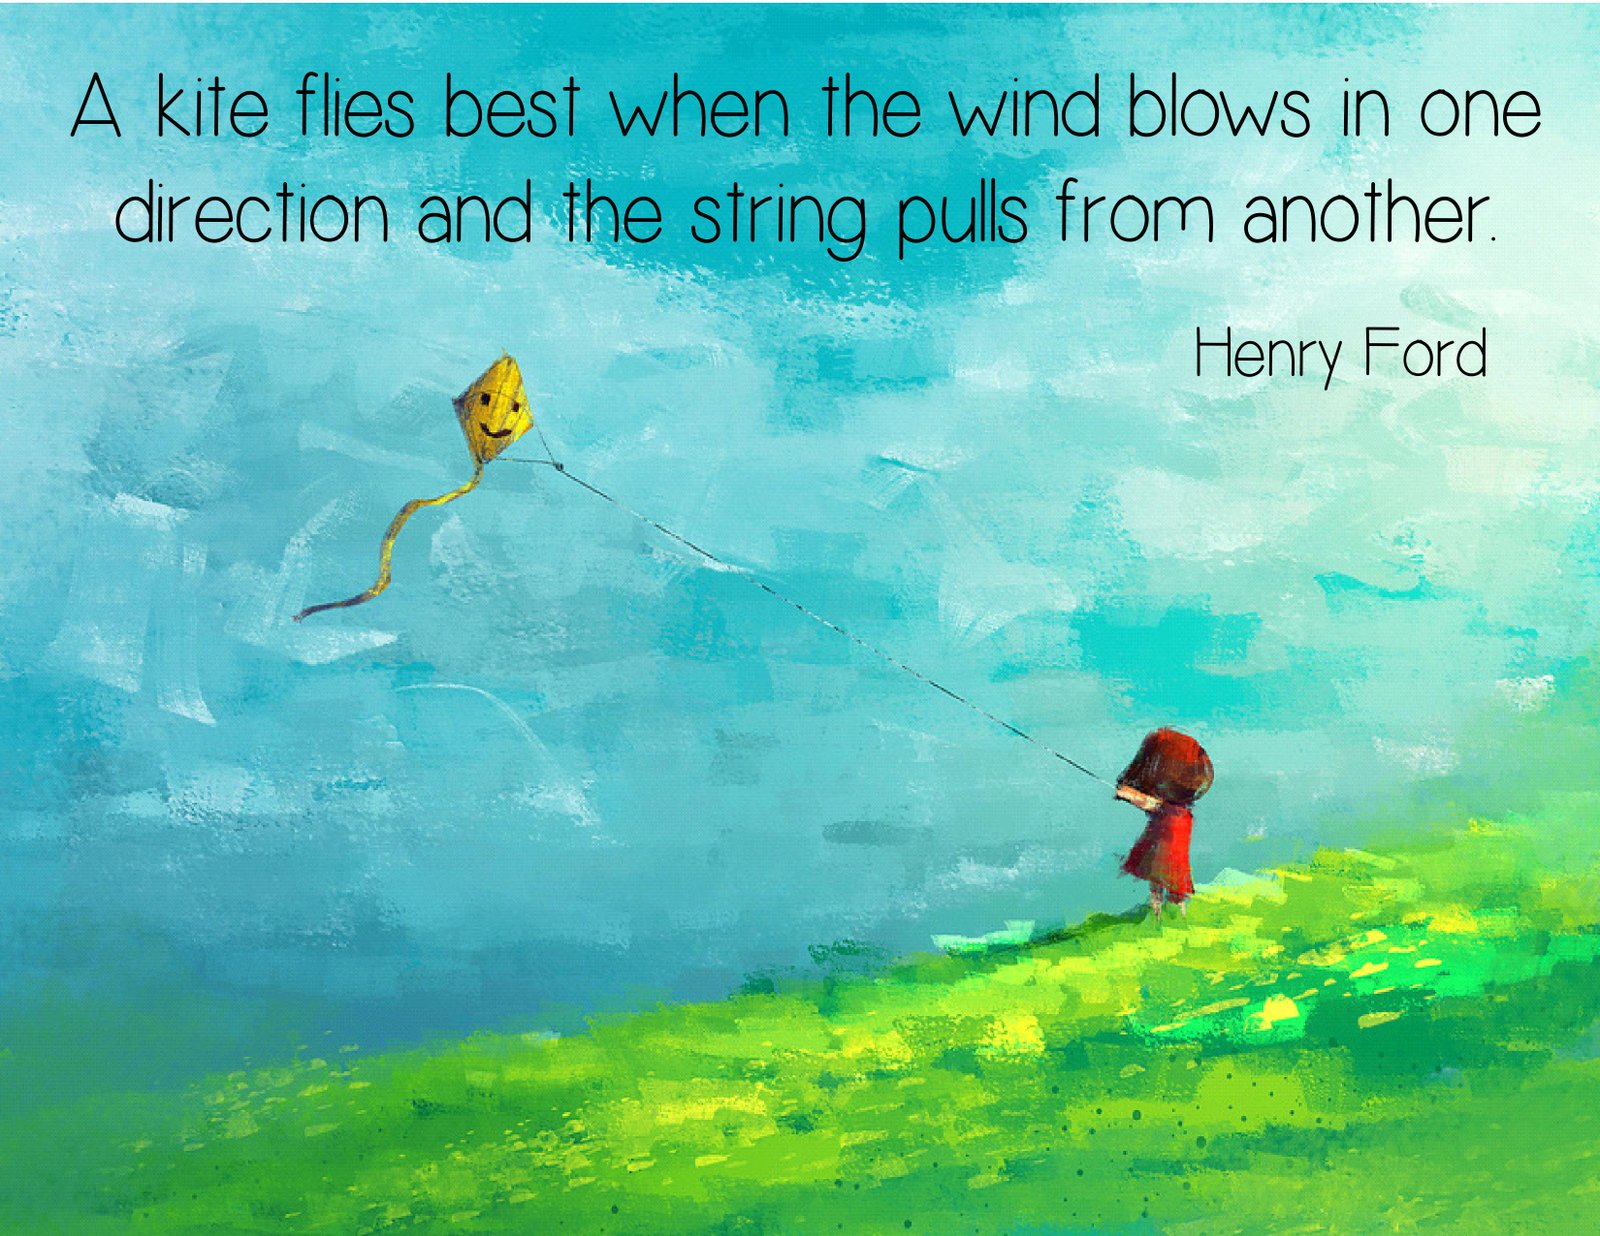 A kite flies best when the wind blows in one direction